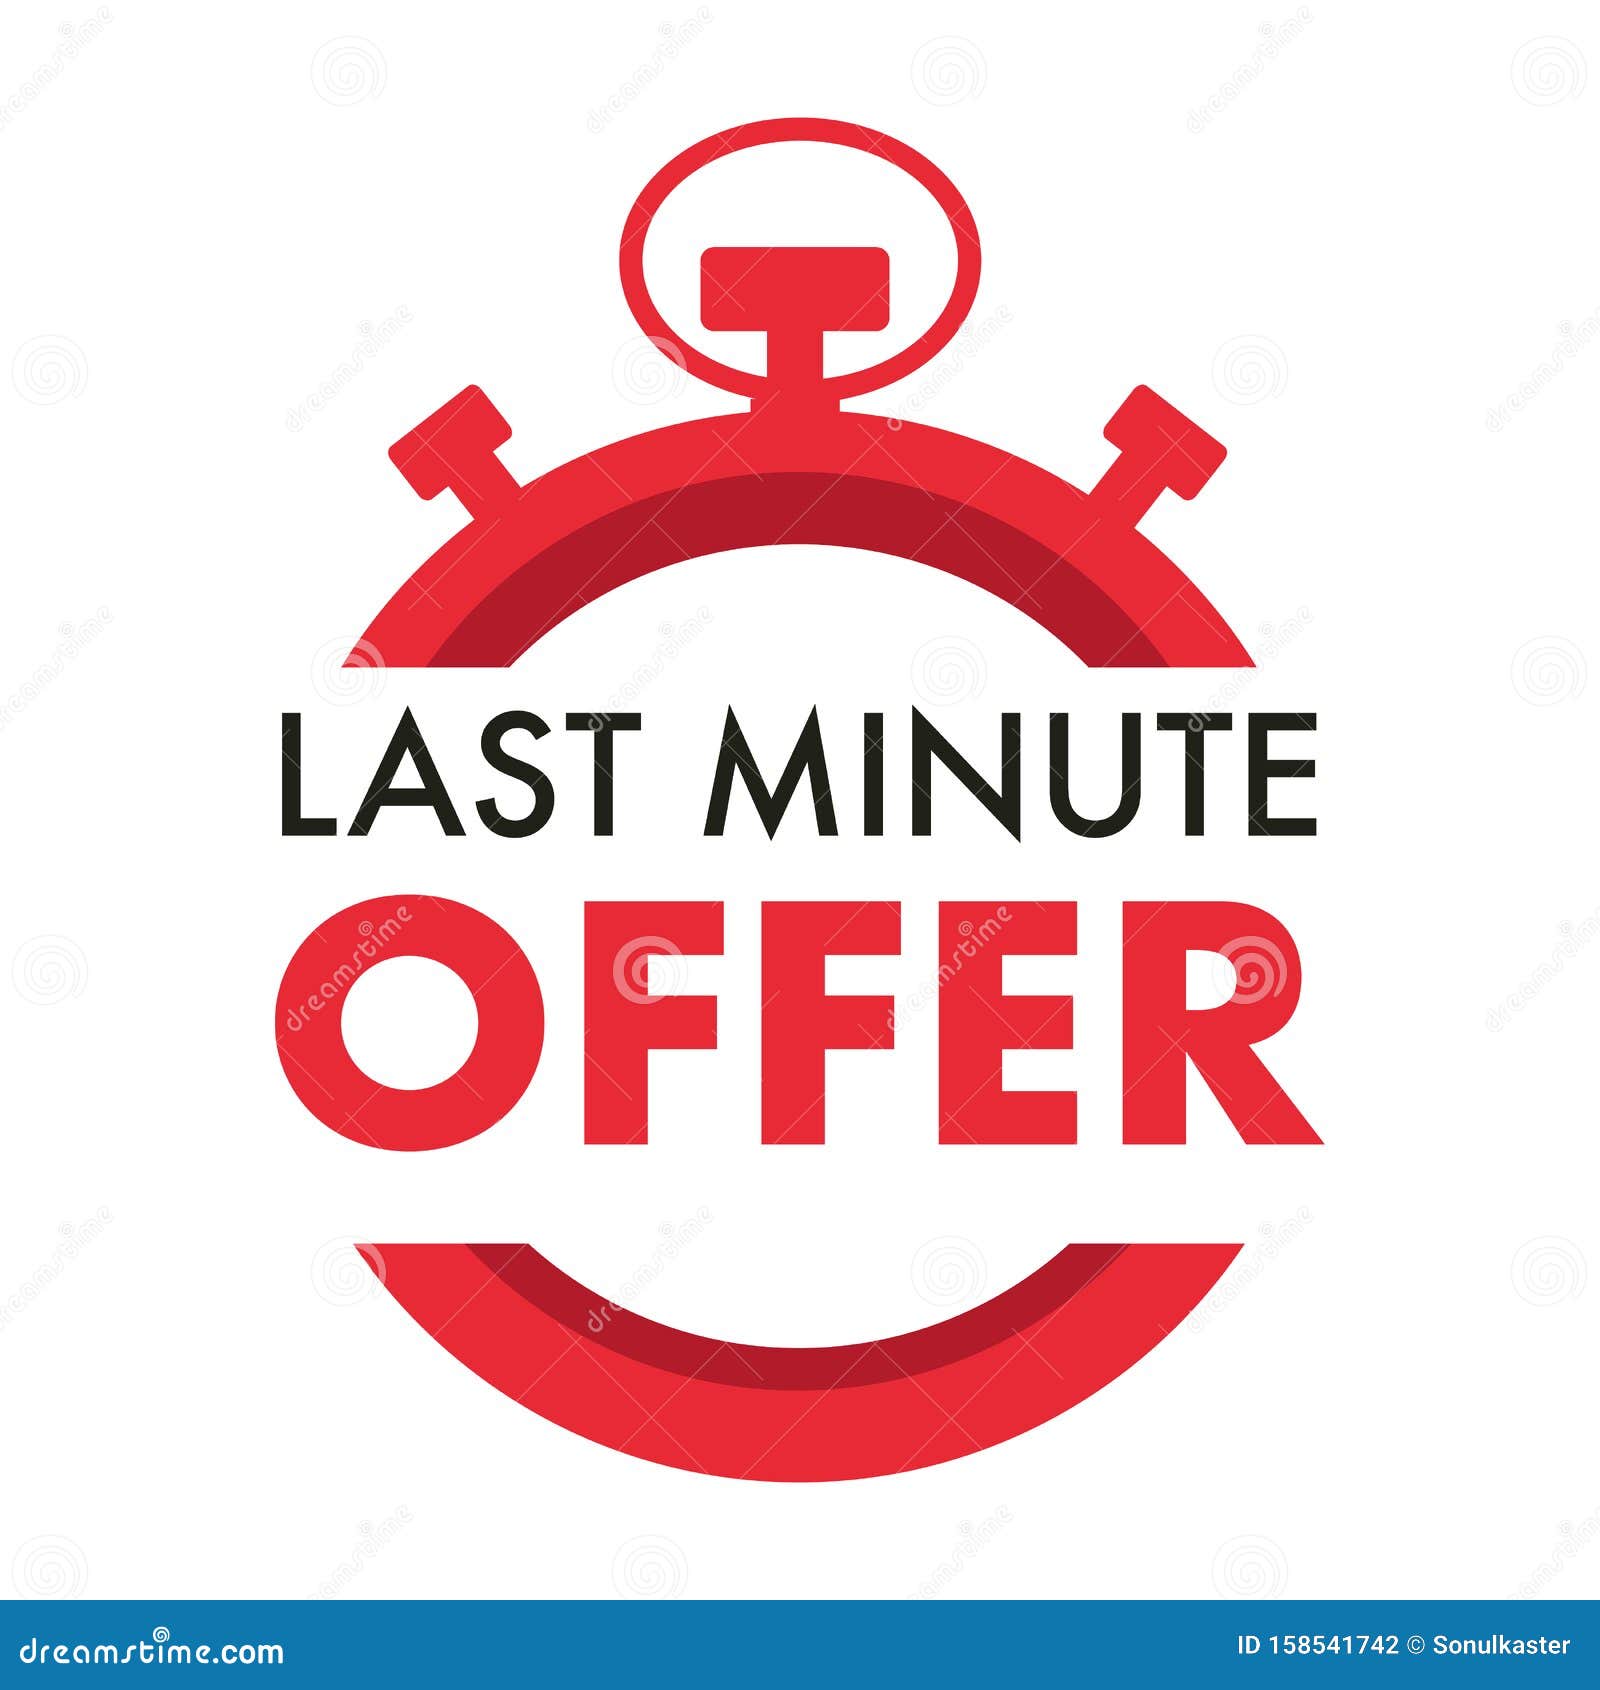 https://thumbs.dreamstime.com/z/last-minute-offer-isolated-icon-timer-stopwatch-countdown-last-minute-offer-one-day-sales-timer-stopwatch-isolated-icon-158541742.jpg